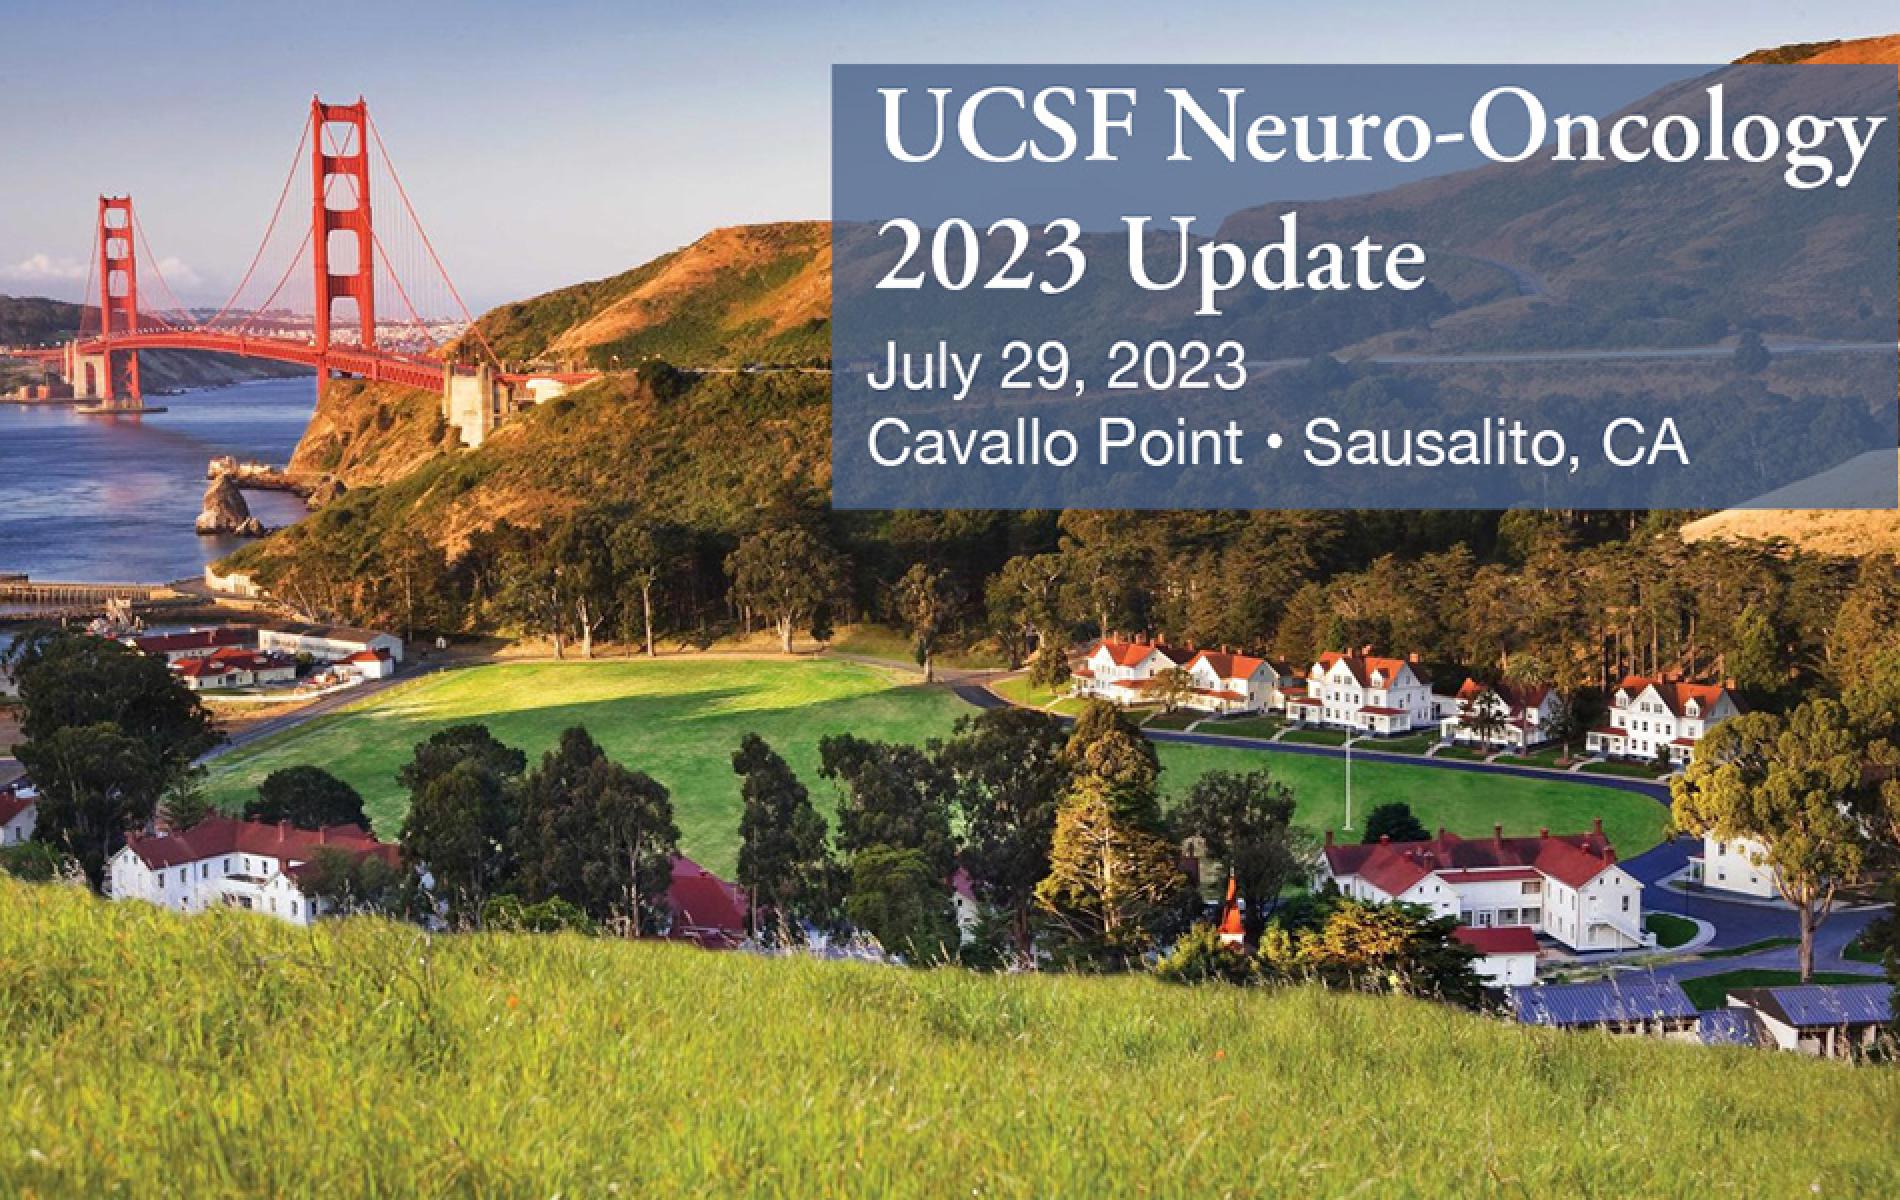 Graphic showing a view of the Golden Gate Bridge from Cavallo Point in Sausalito. Text says UCSF Neuro-Oncology 2023 Update, July 29, 2023, Cavallo Point, Sausalito, CA.